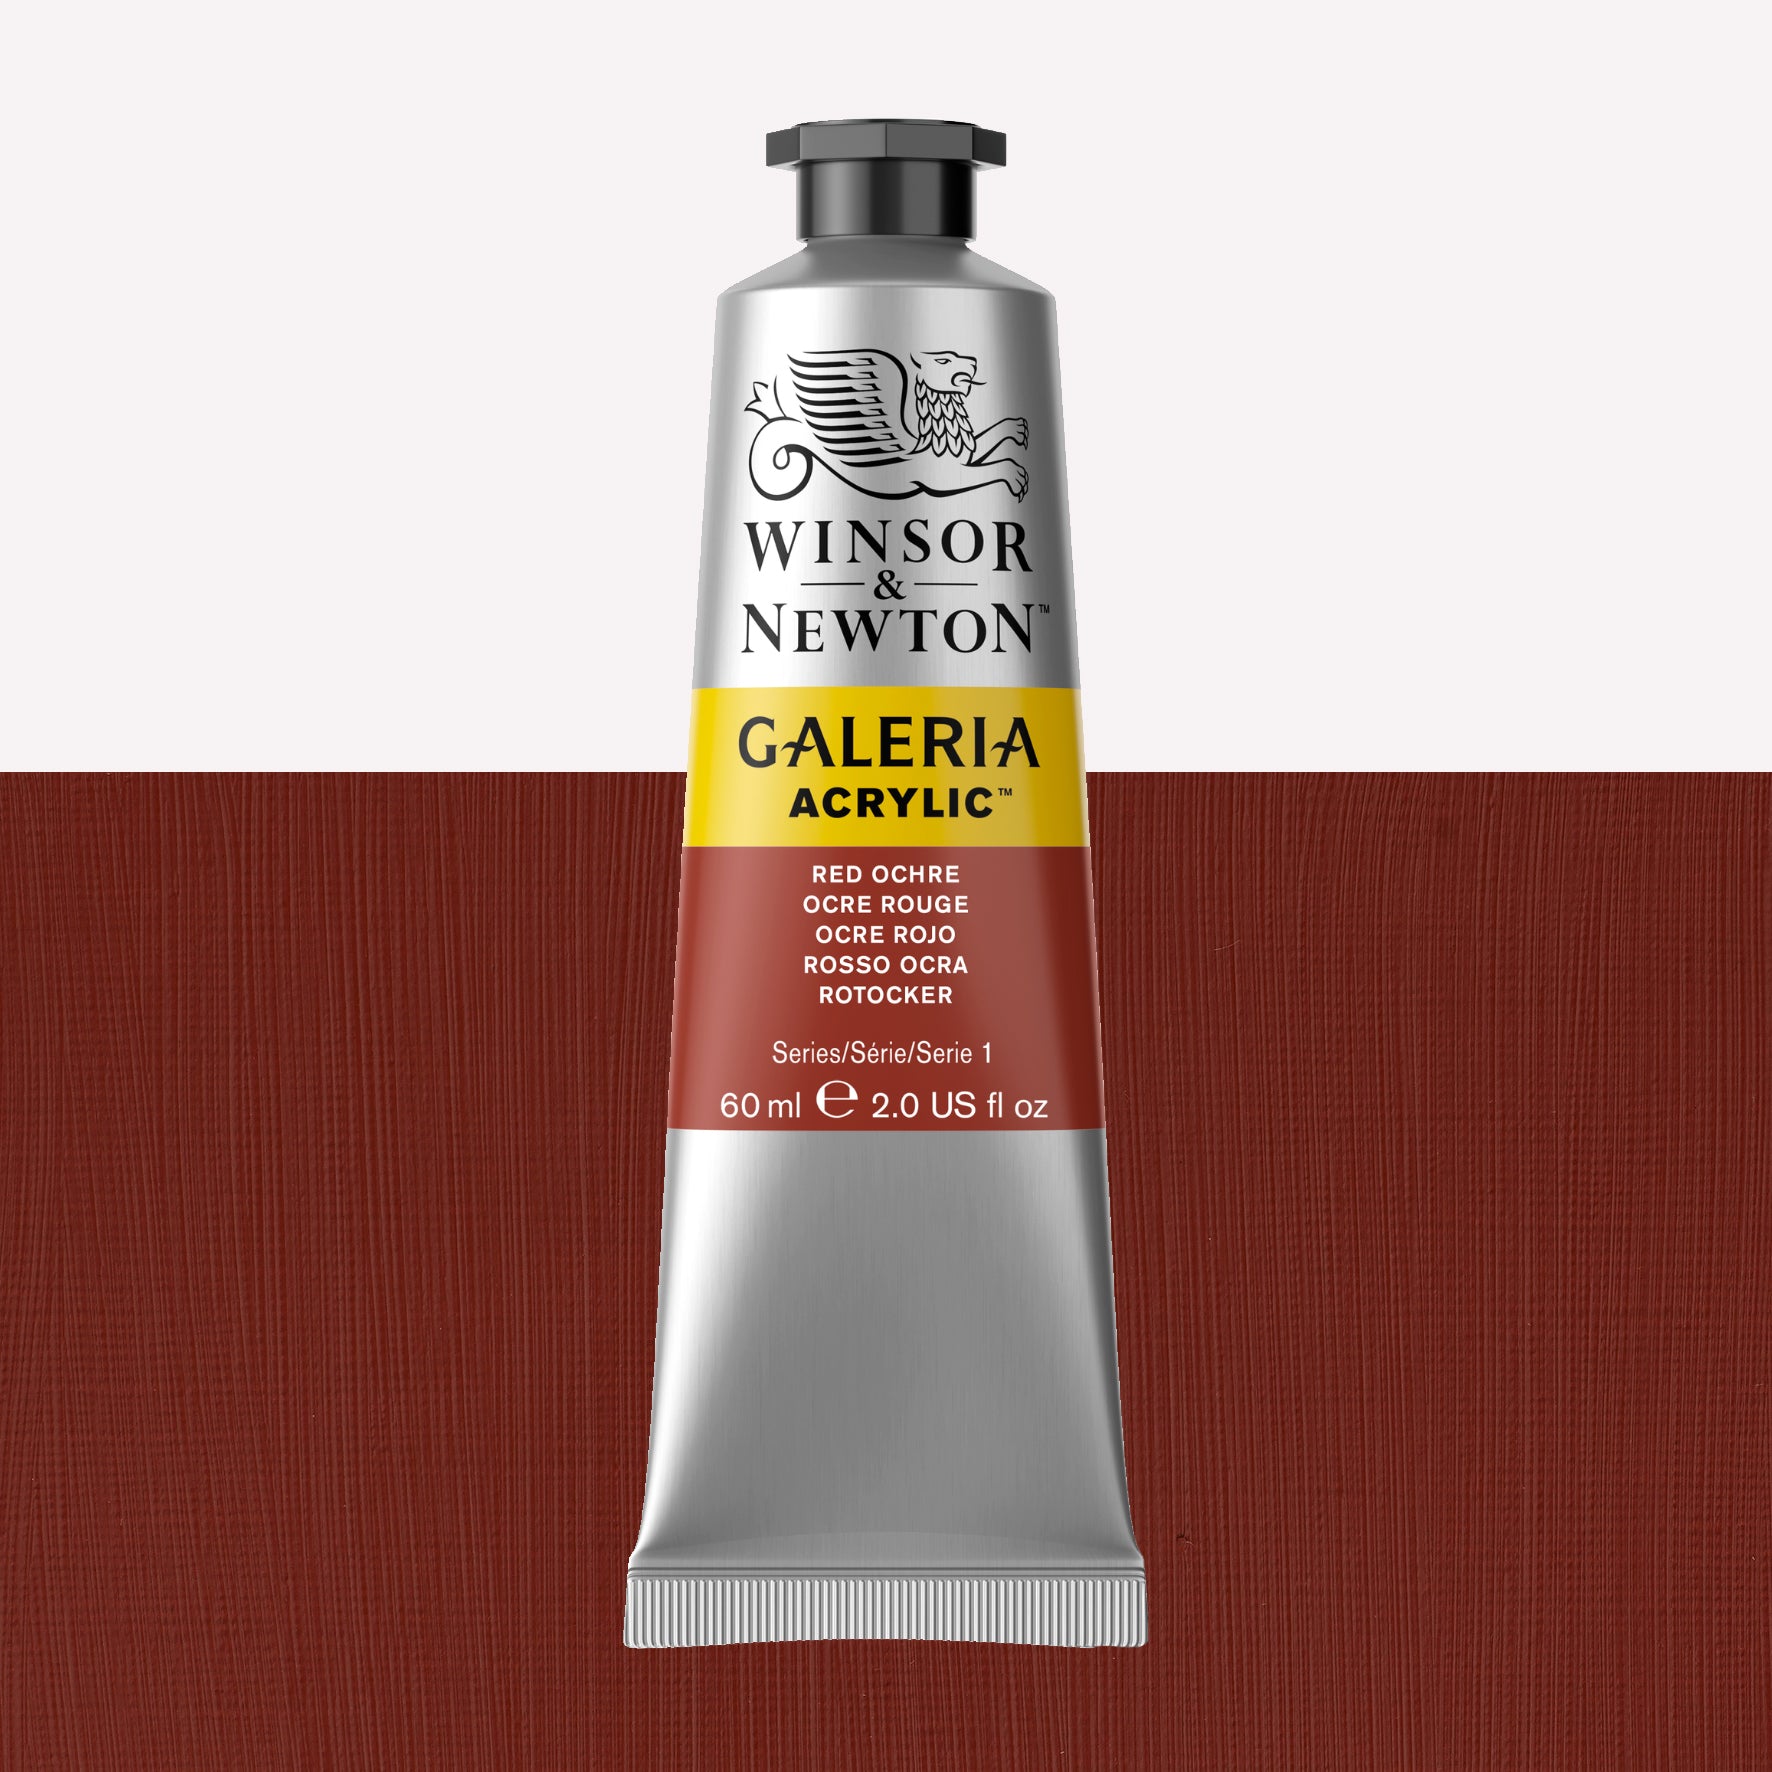 A 60ml tube of vibrant Galeria Acrylic paint in the shade Red Ochre. This professional-quality paint is packaged in a silver tube with a black lid. Made by Winsor and Newton.